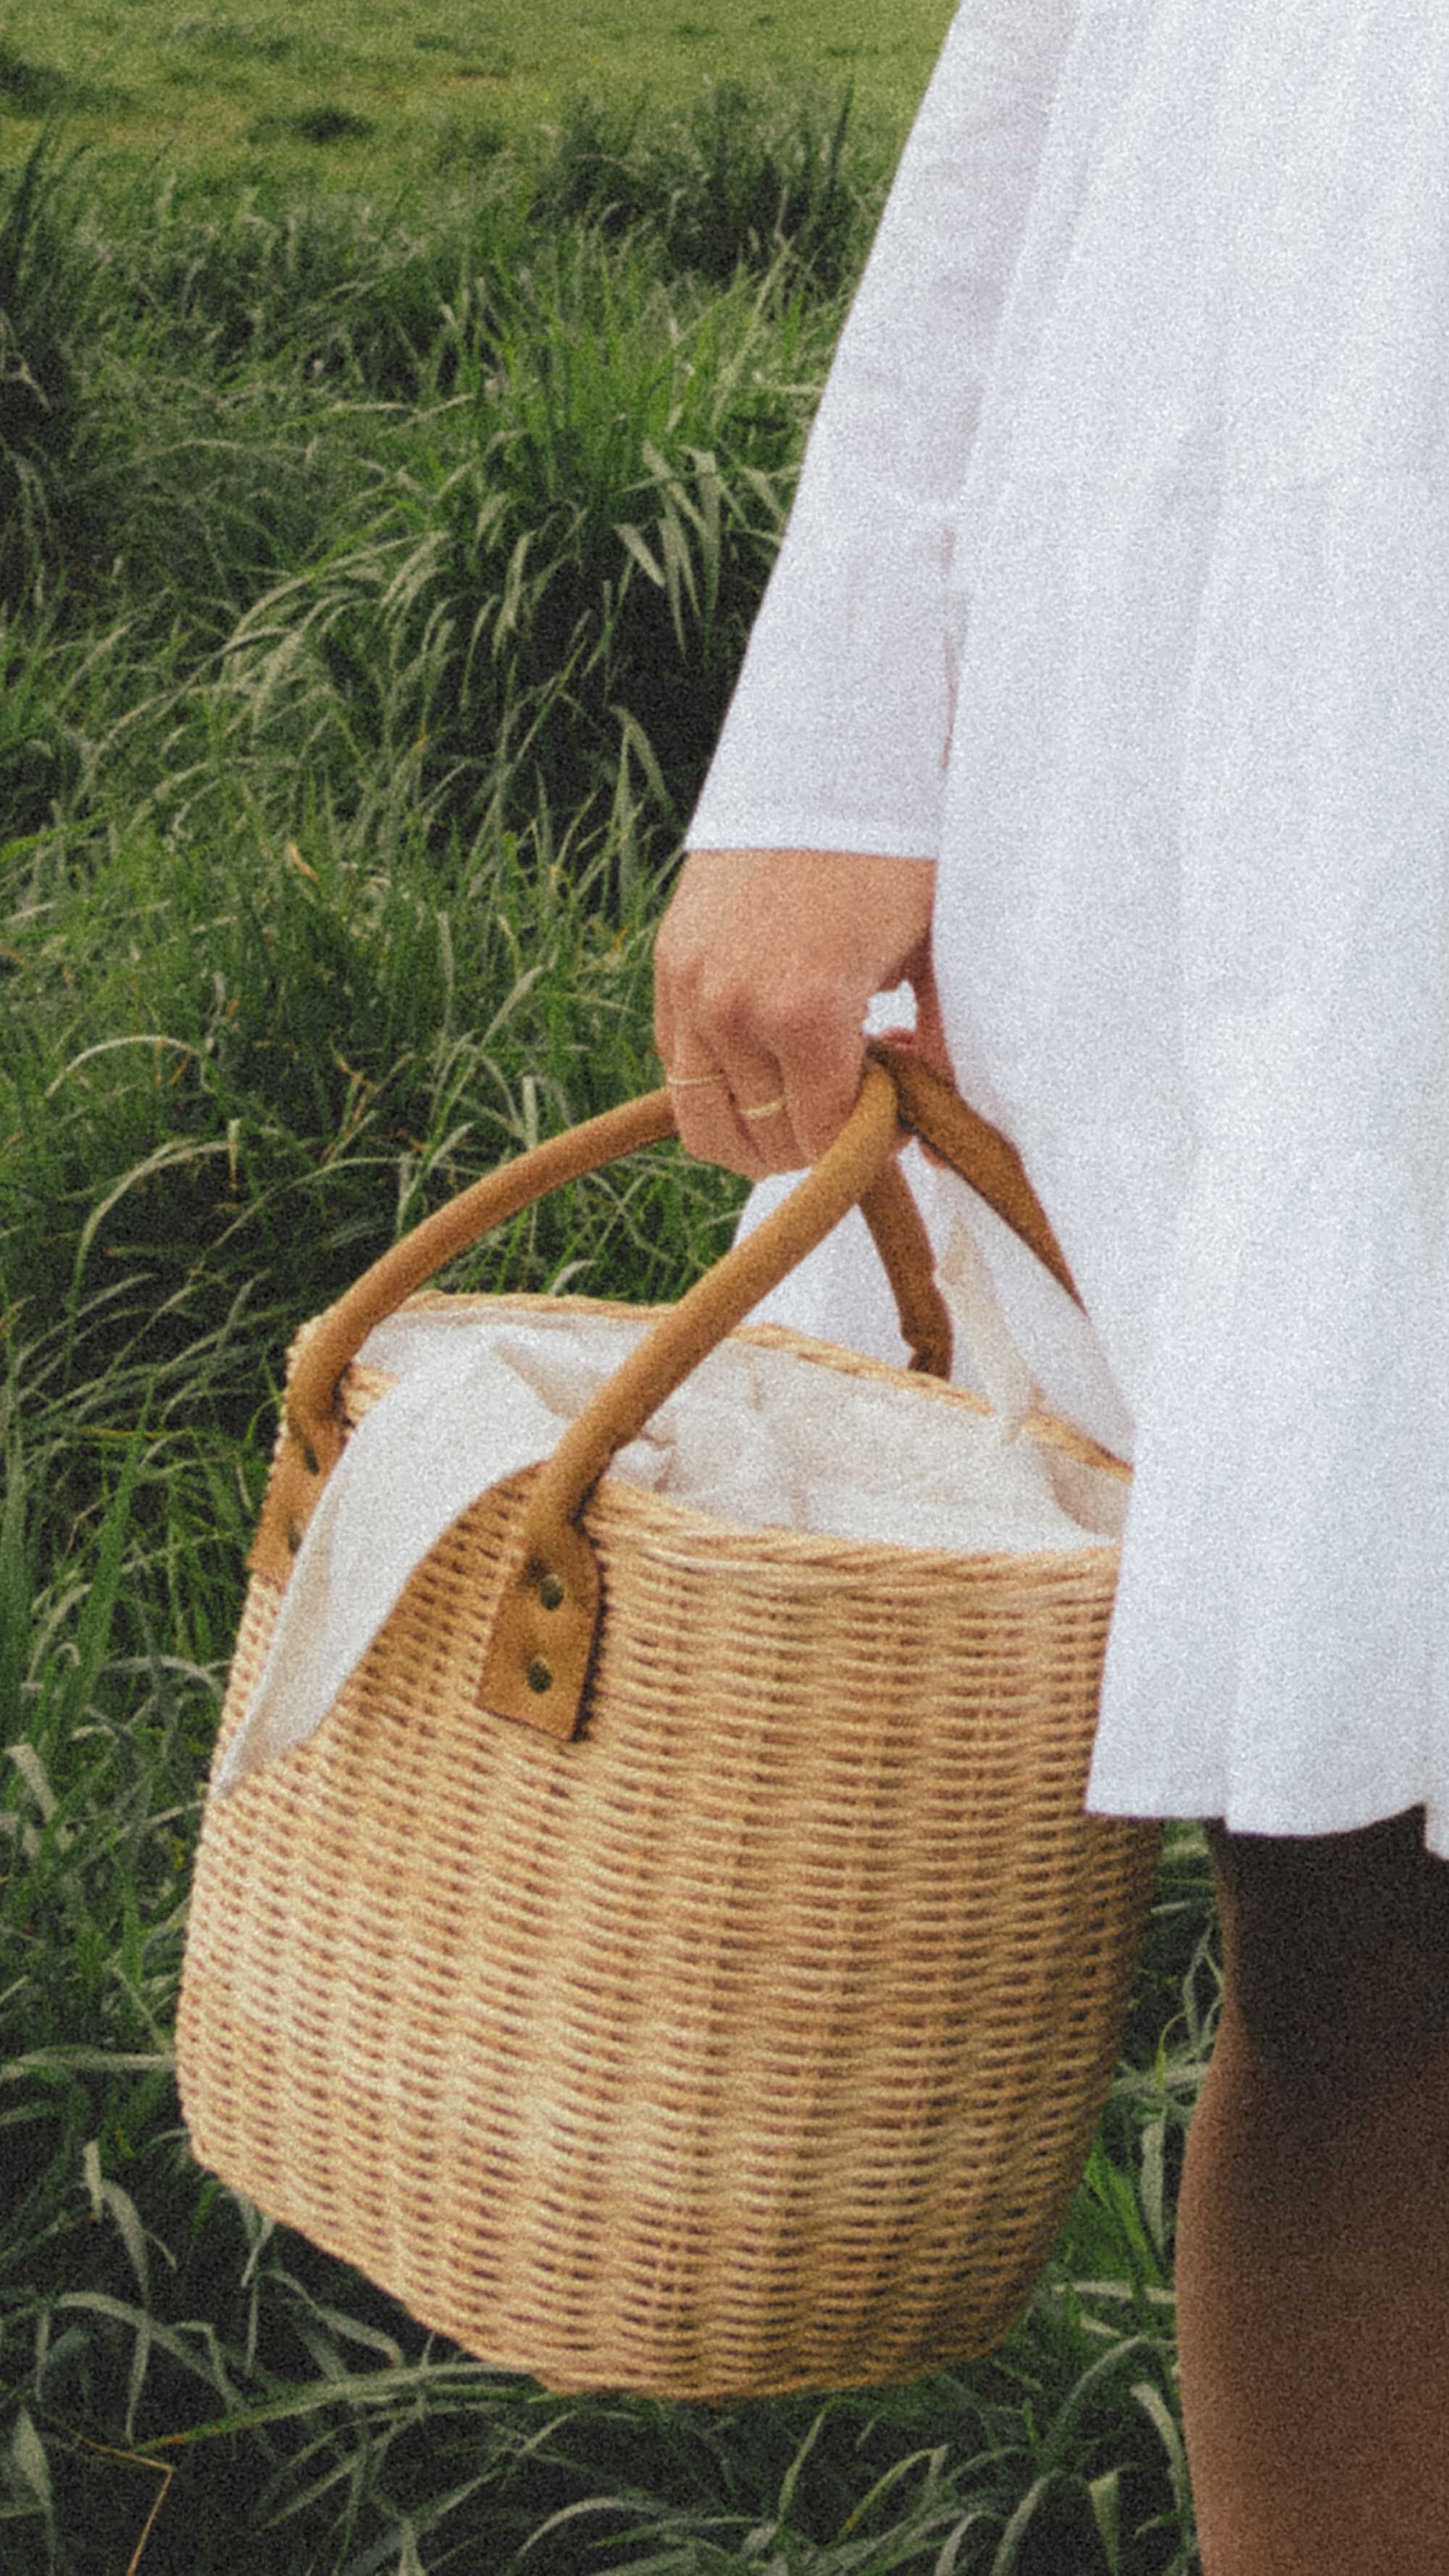 Cute white summer mini dress. Sarah Butler of @sarahchristine wearing Merlette Soliman Tiered White Mini Dress with basket bag in countryside of Seattle, Washington - 3.jpg